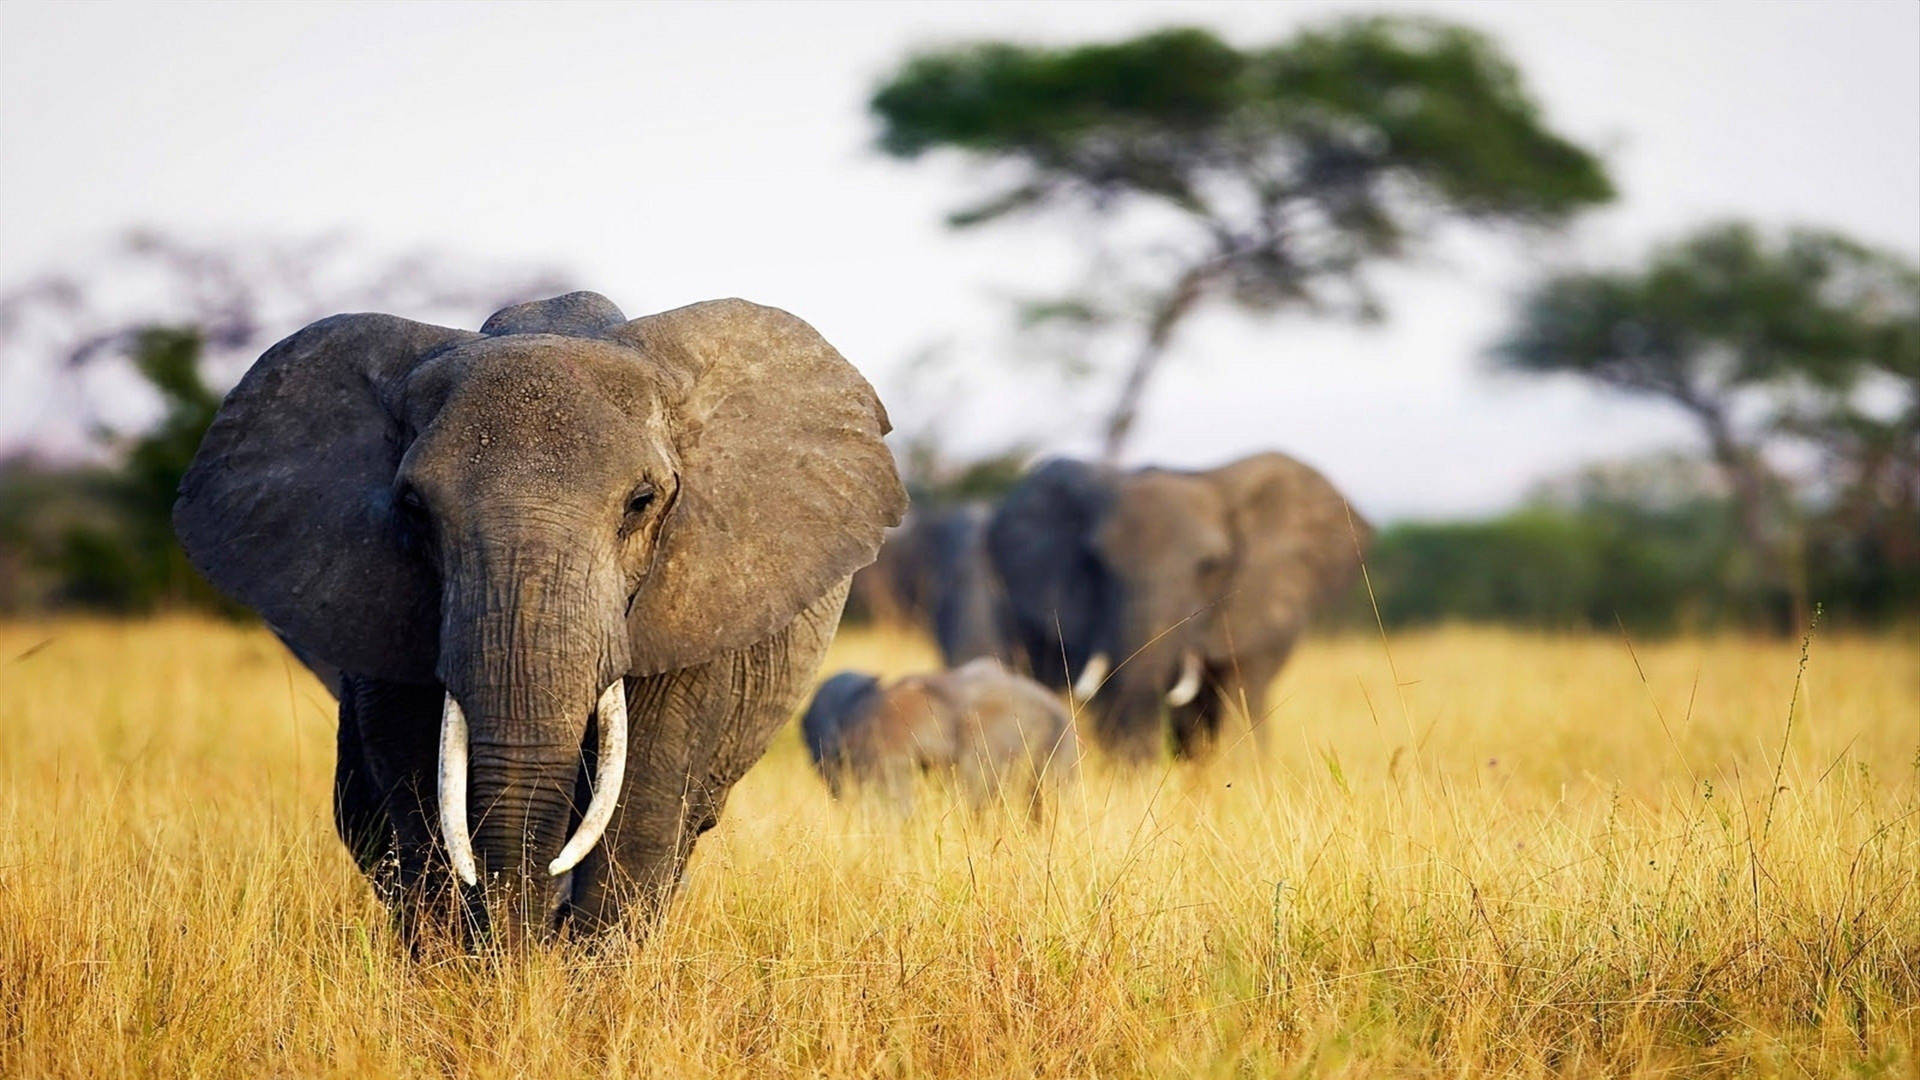 Enjoy the view of an Elephant walking in the grassland Wallpaper